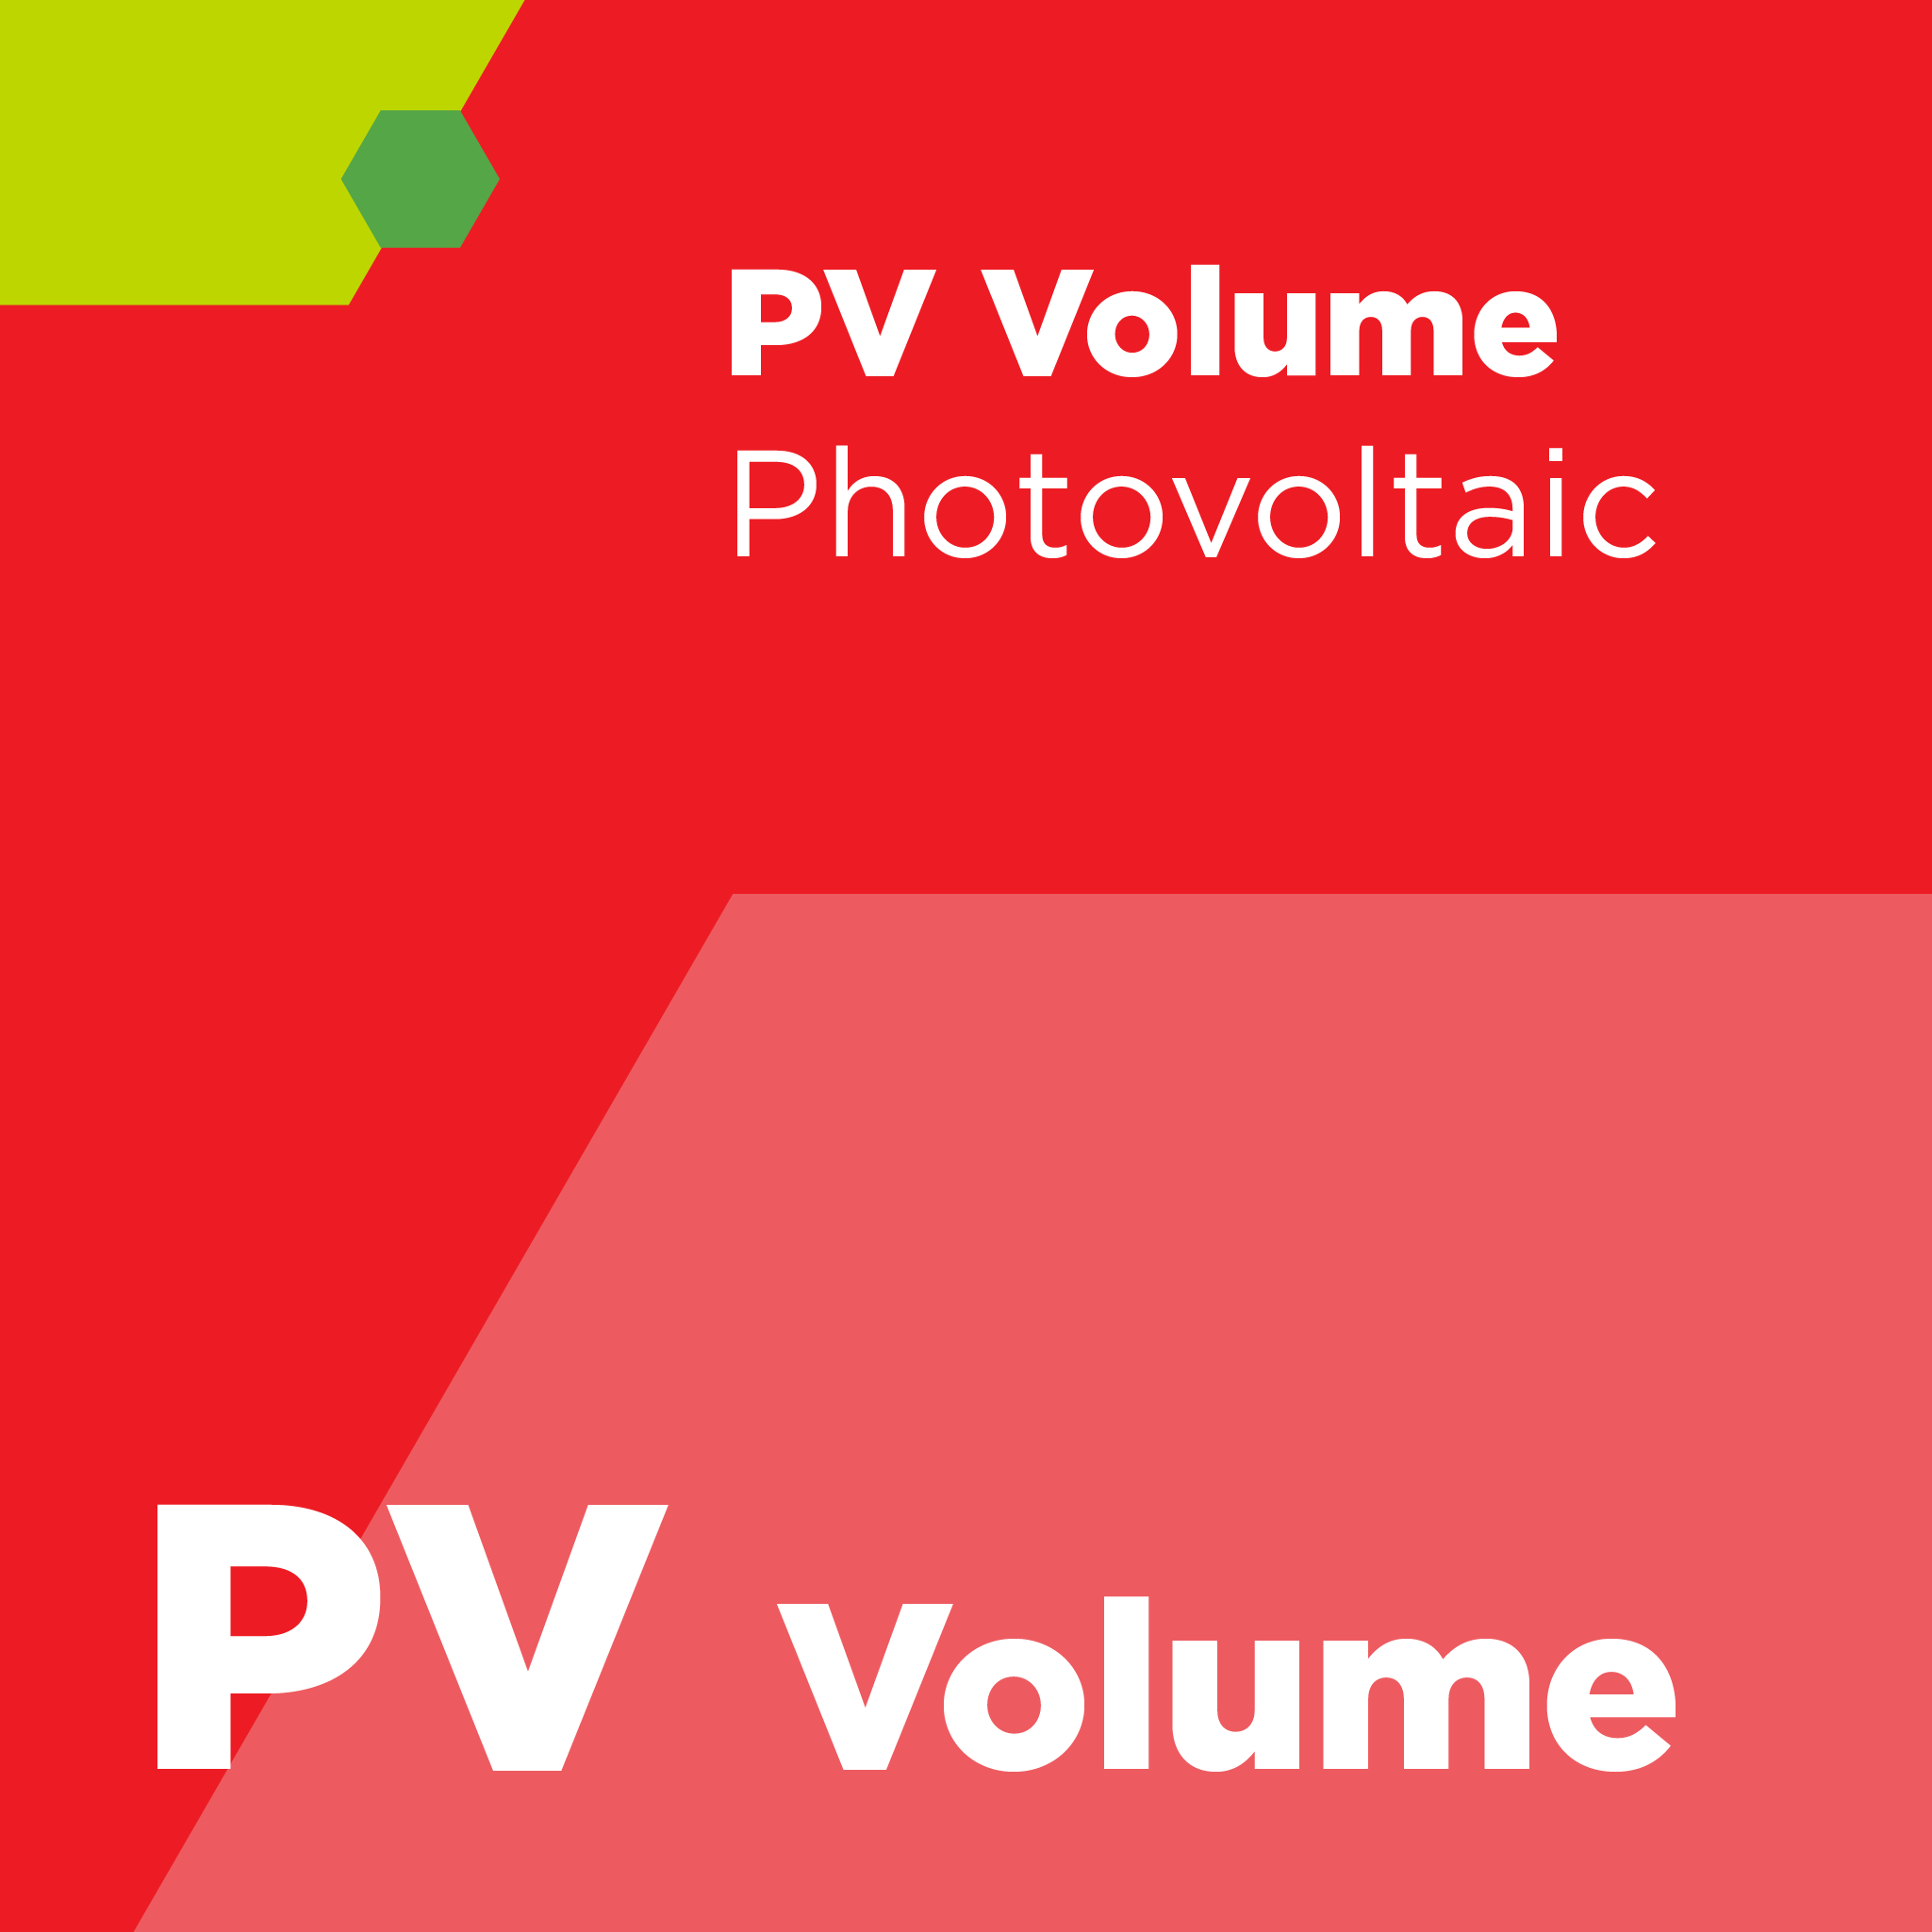 PV03400 - SEMI PV34 - Practice for Assigning Identification Numbers to PV Si Brick, Wafer and Solar Cell Manufacturers